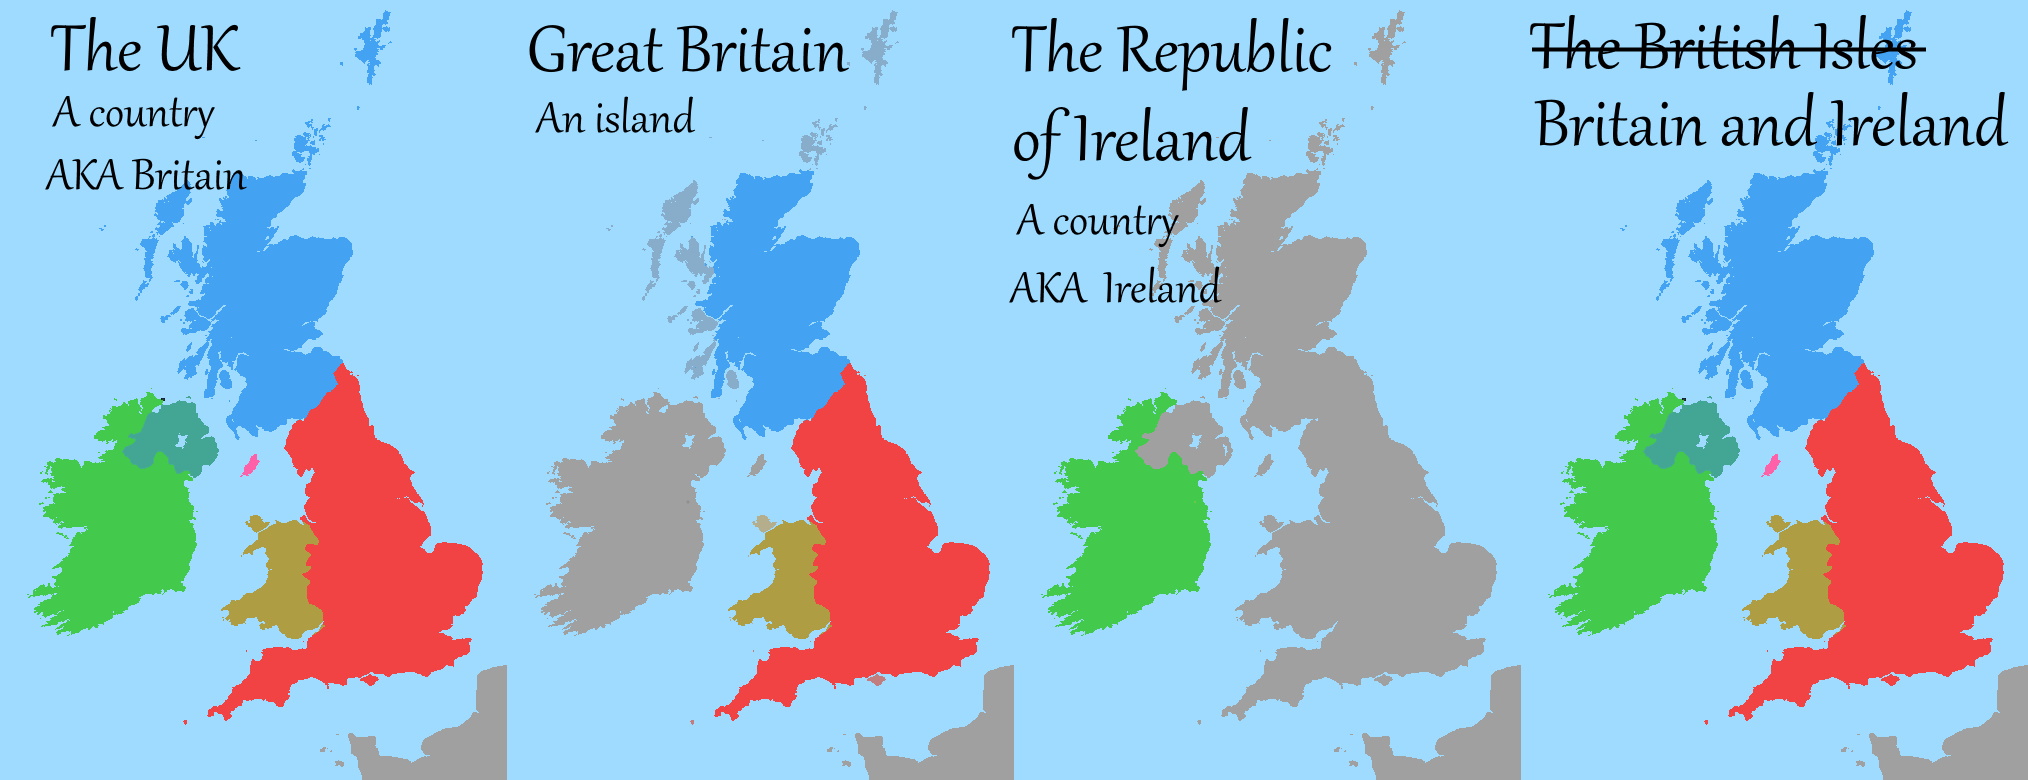 The difference between Britain, Great Britain, the United Kingdom, and